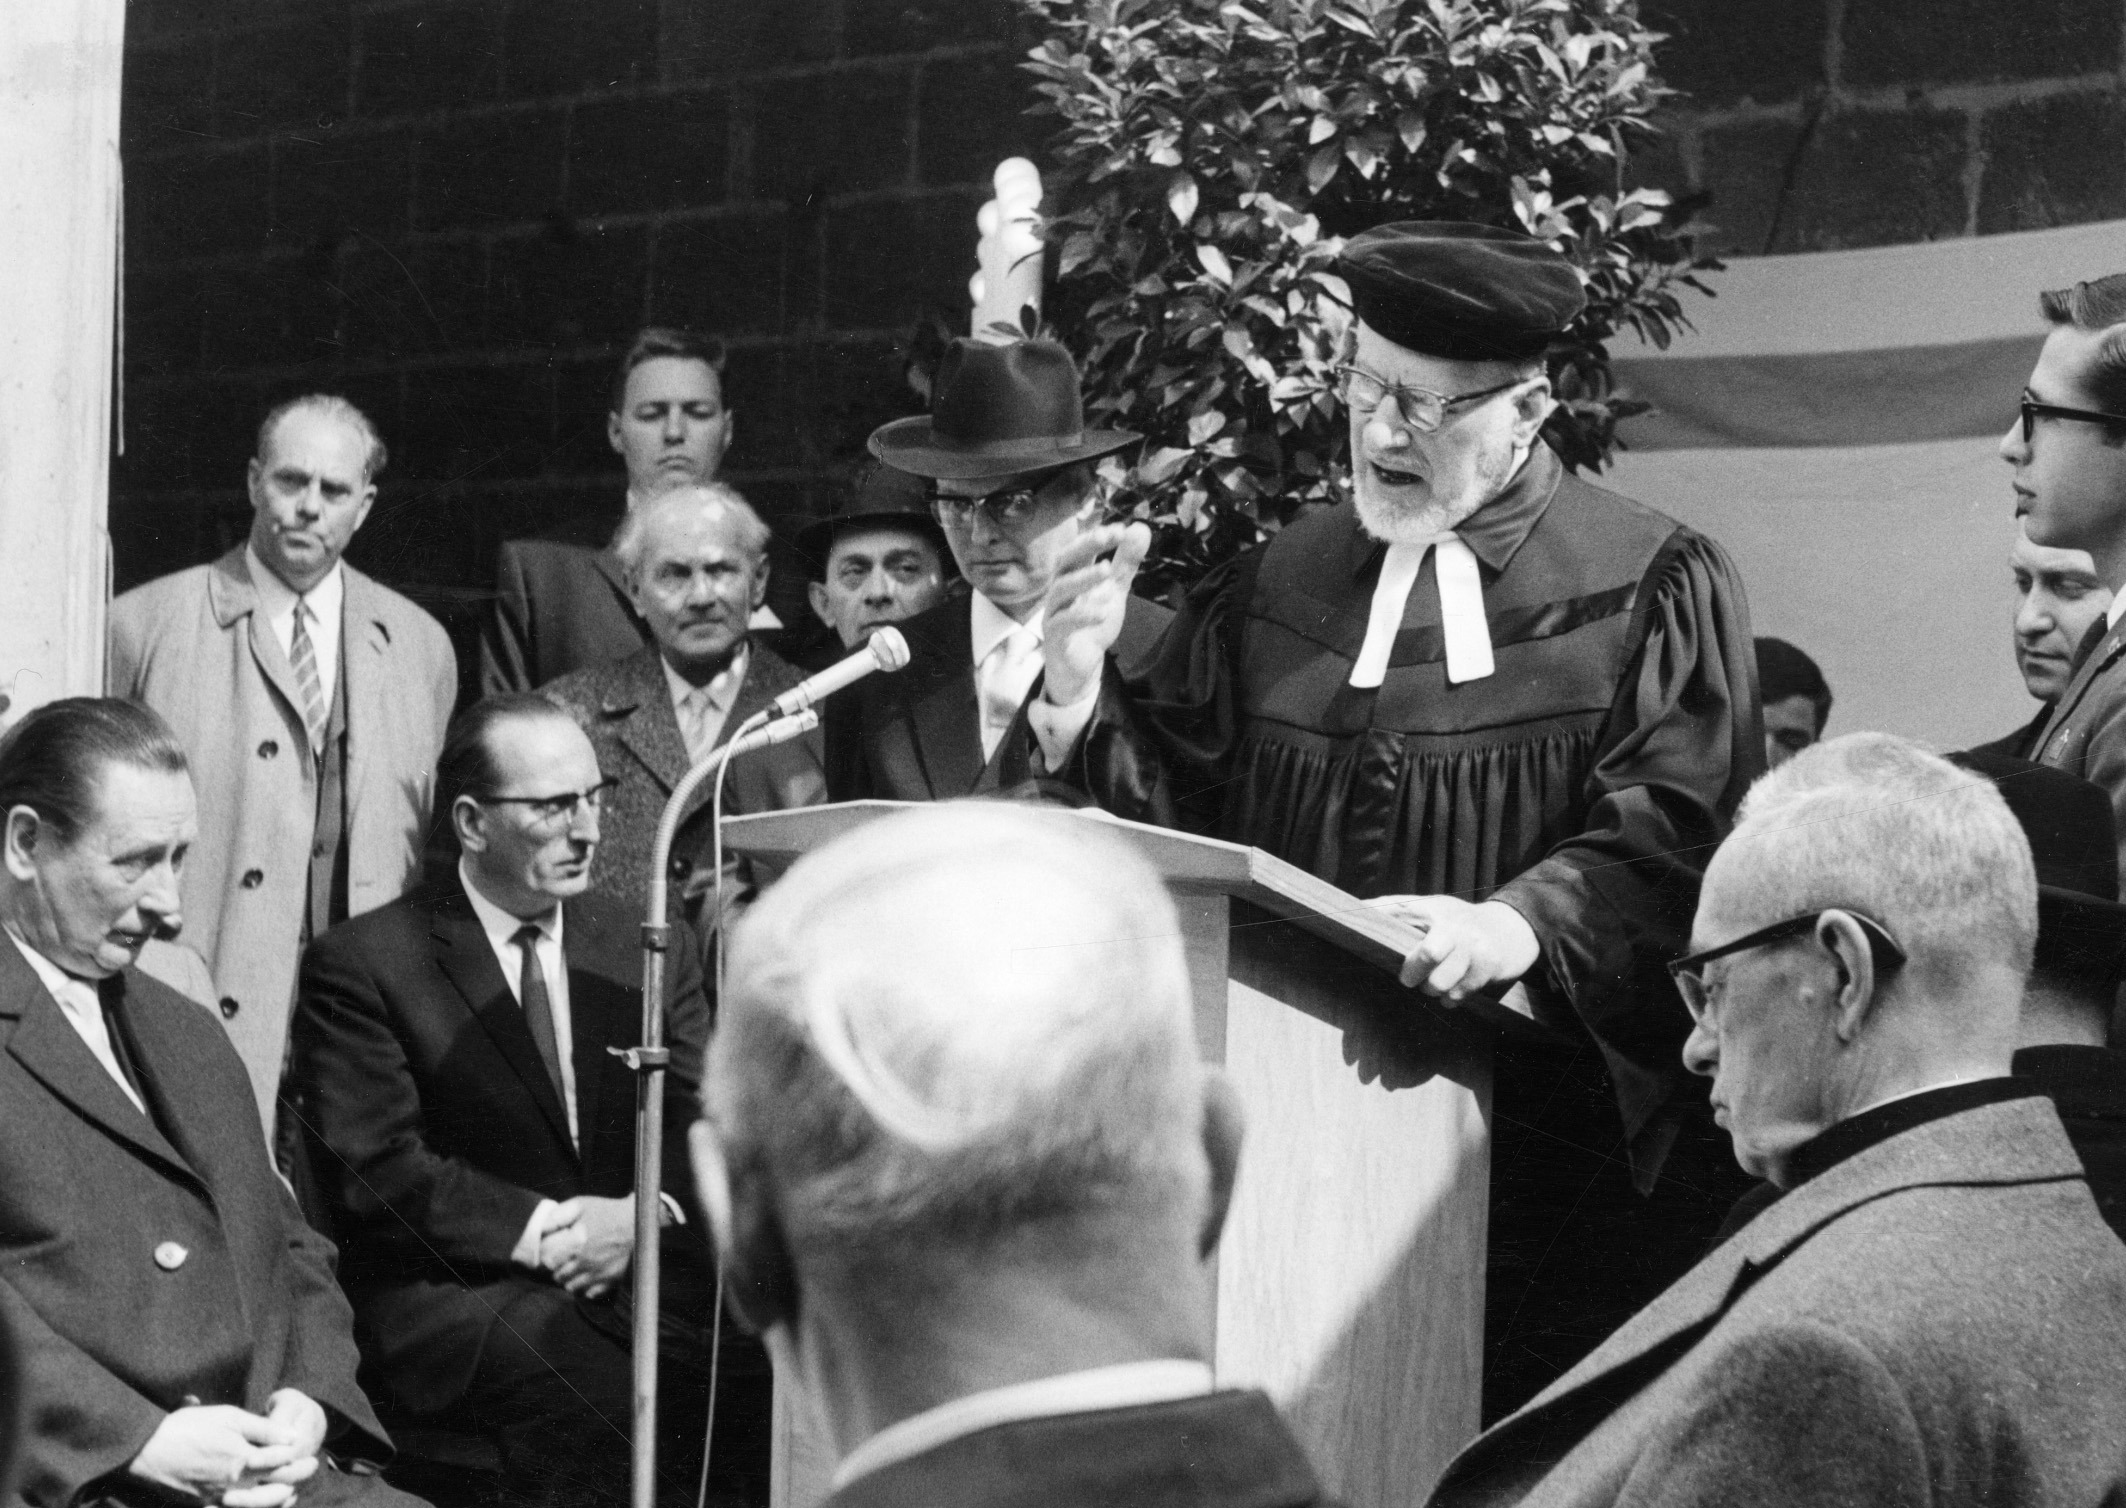 State Rabbi I. E. Lichtigfeld with a greeting for the laying of the cornerstone. StadtA WI, F000-264